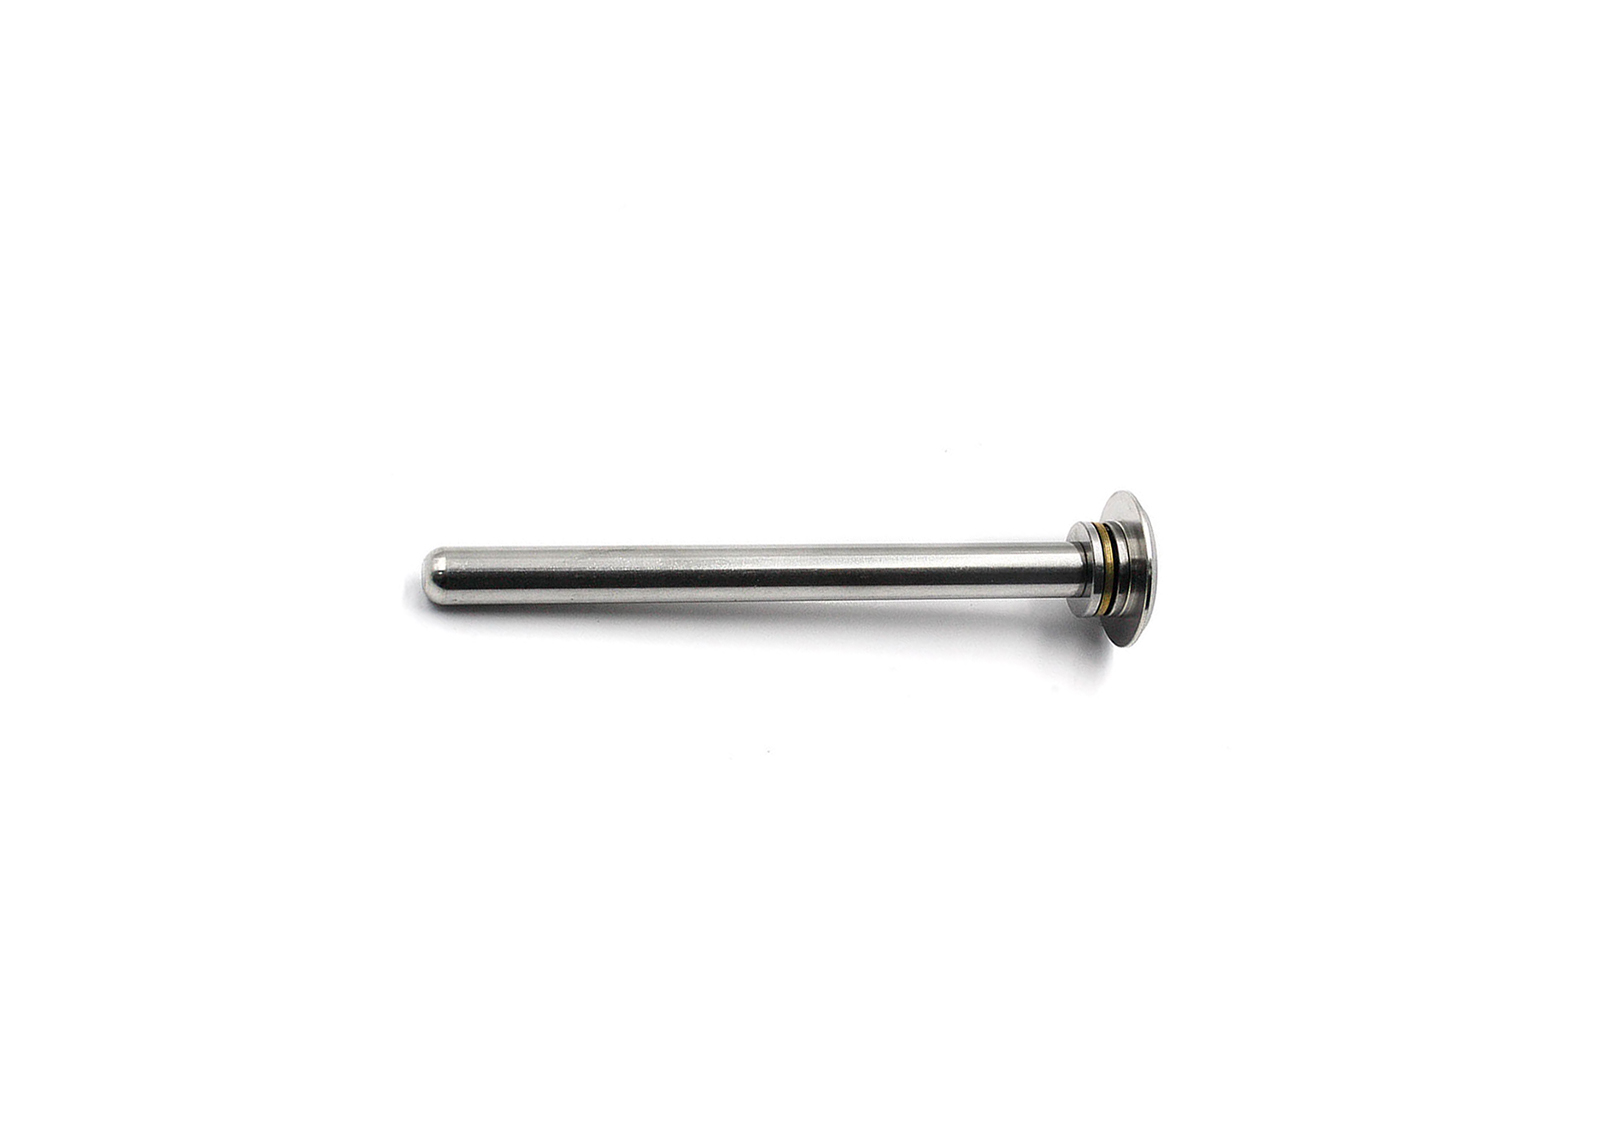 Stainless Spring Guide w/ Bearing for APS-2 series (7mm) - Modify Bolt Action Rifle Parts